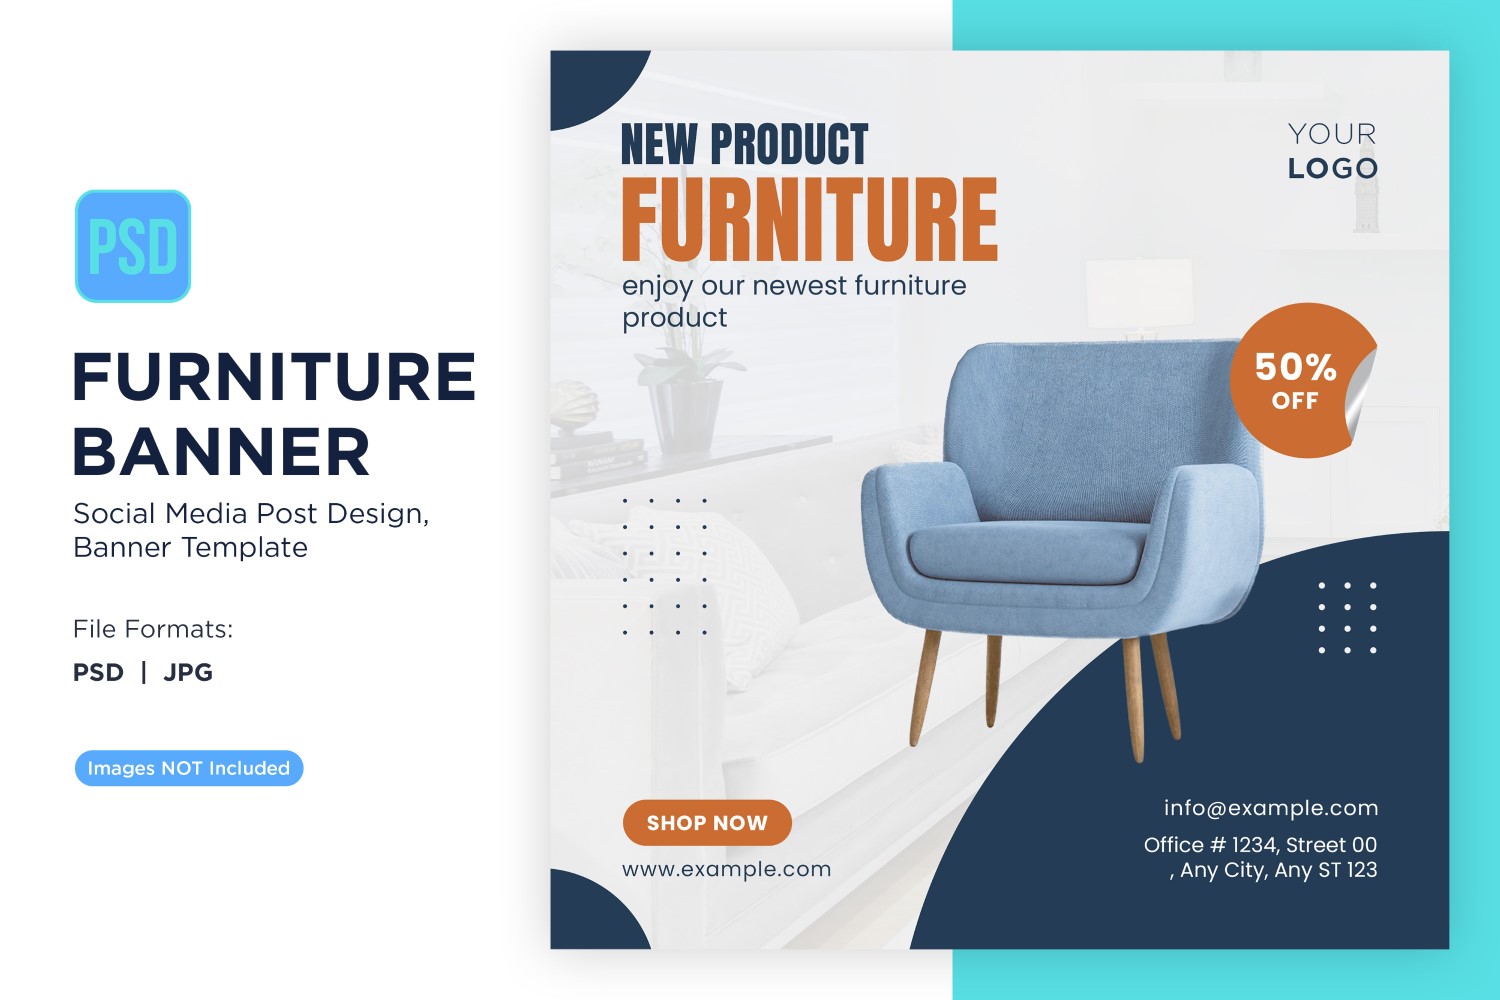 New Product Furniture Banner Design Template